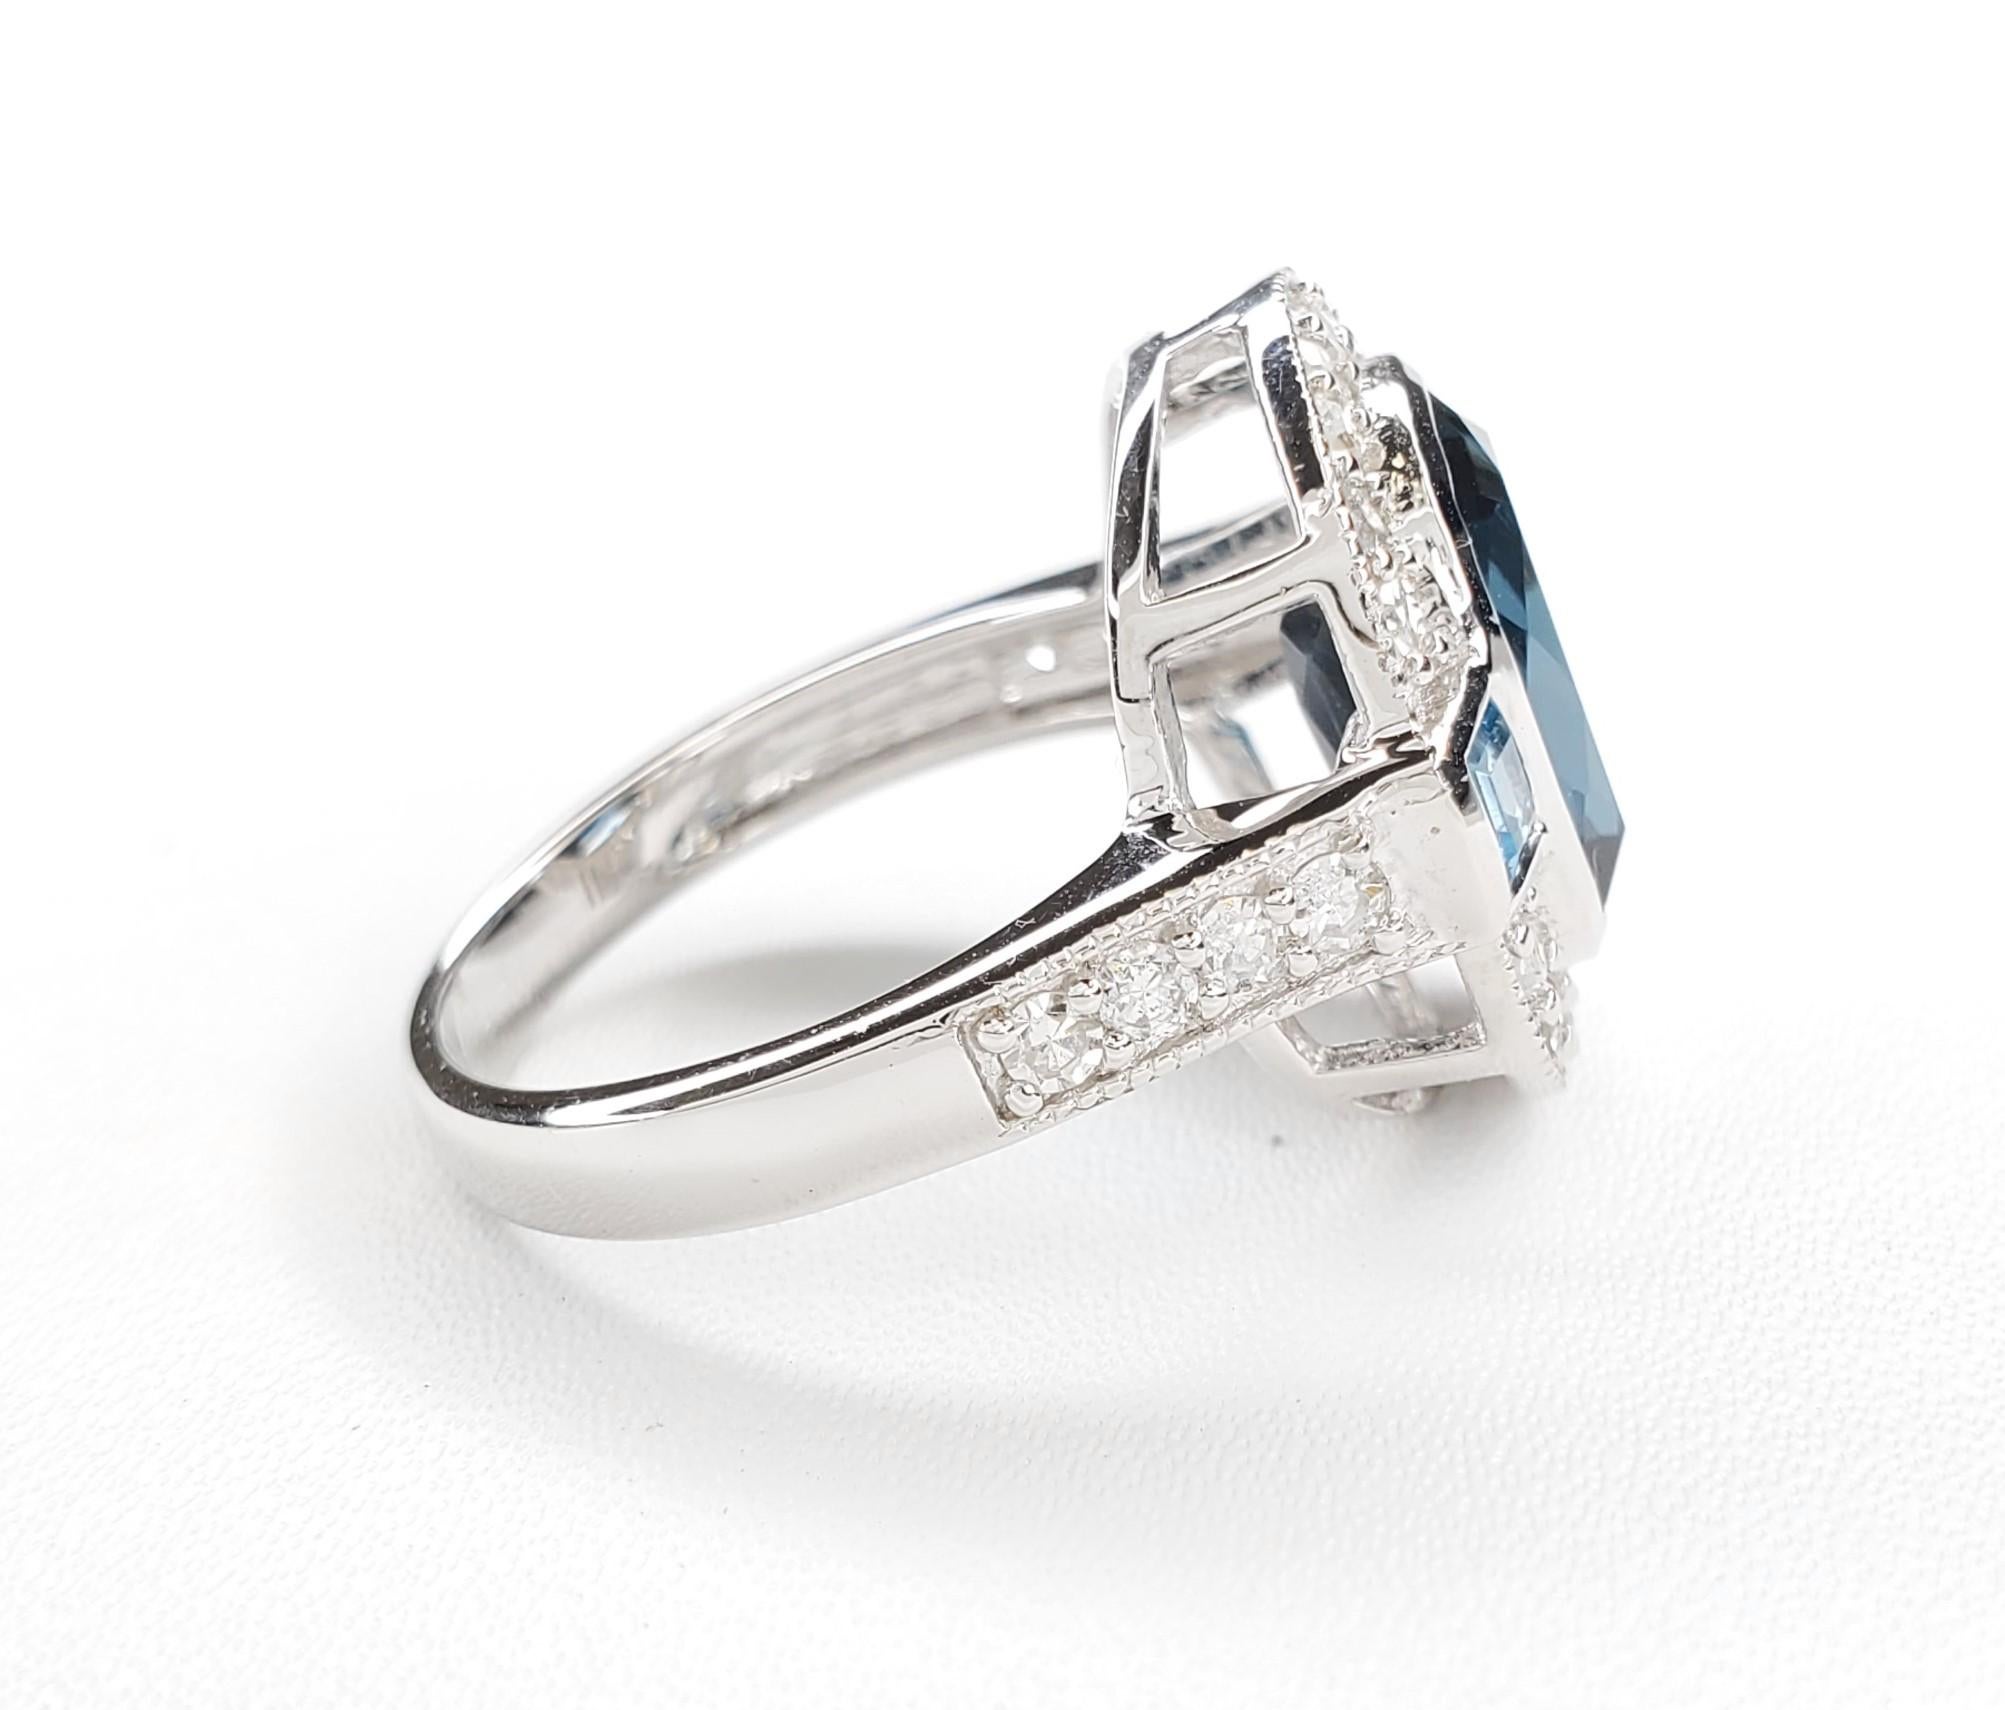 5.32cttw London Blue Topaz Sterling Silver Ring - Size 7

1 London Blue Topaz Cushion - 4.30cttw 
2 Swiss Blue Topaz Square - 0.34cttw 
18 White Diamond S/C Round -0.45cttw 	
8 White Diamond S/C Round - 0.23cttw 

.925 Sterling Silver w/ Rhodium